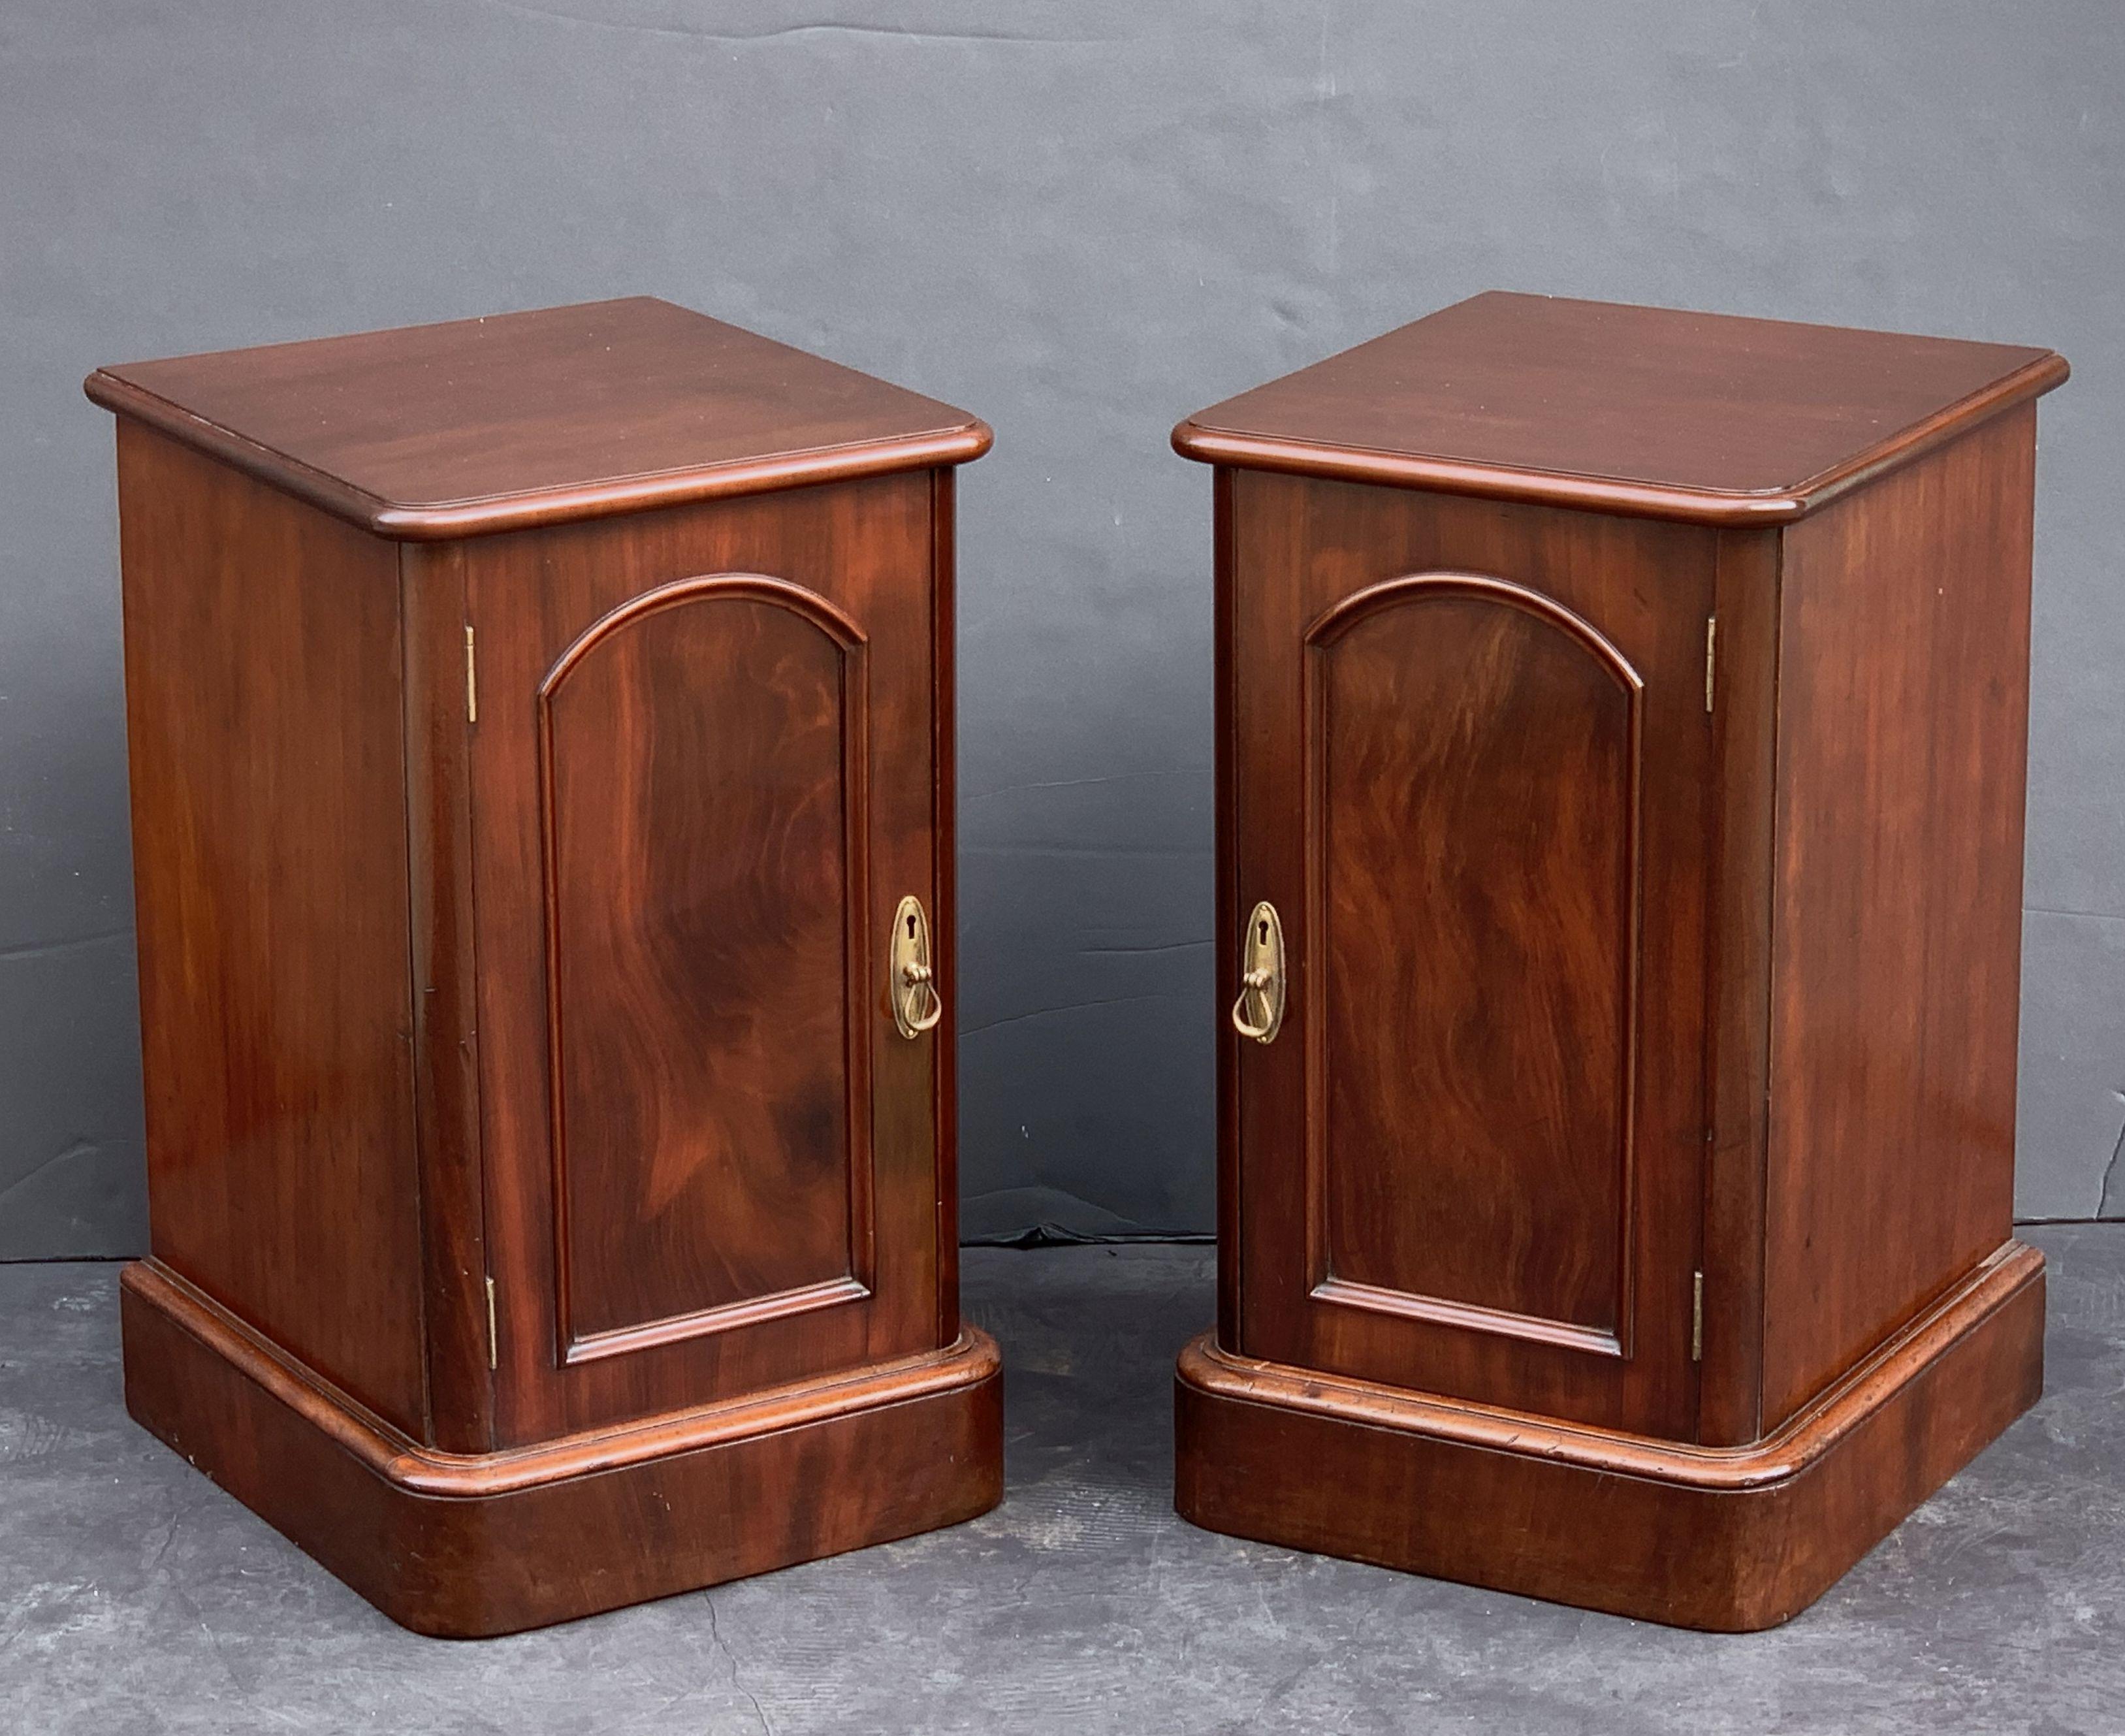 English Bedside Chests or Cabinet Nightstands of Mahogany, Priced as a Pair 10